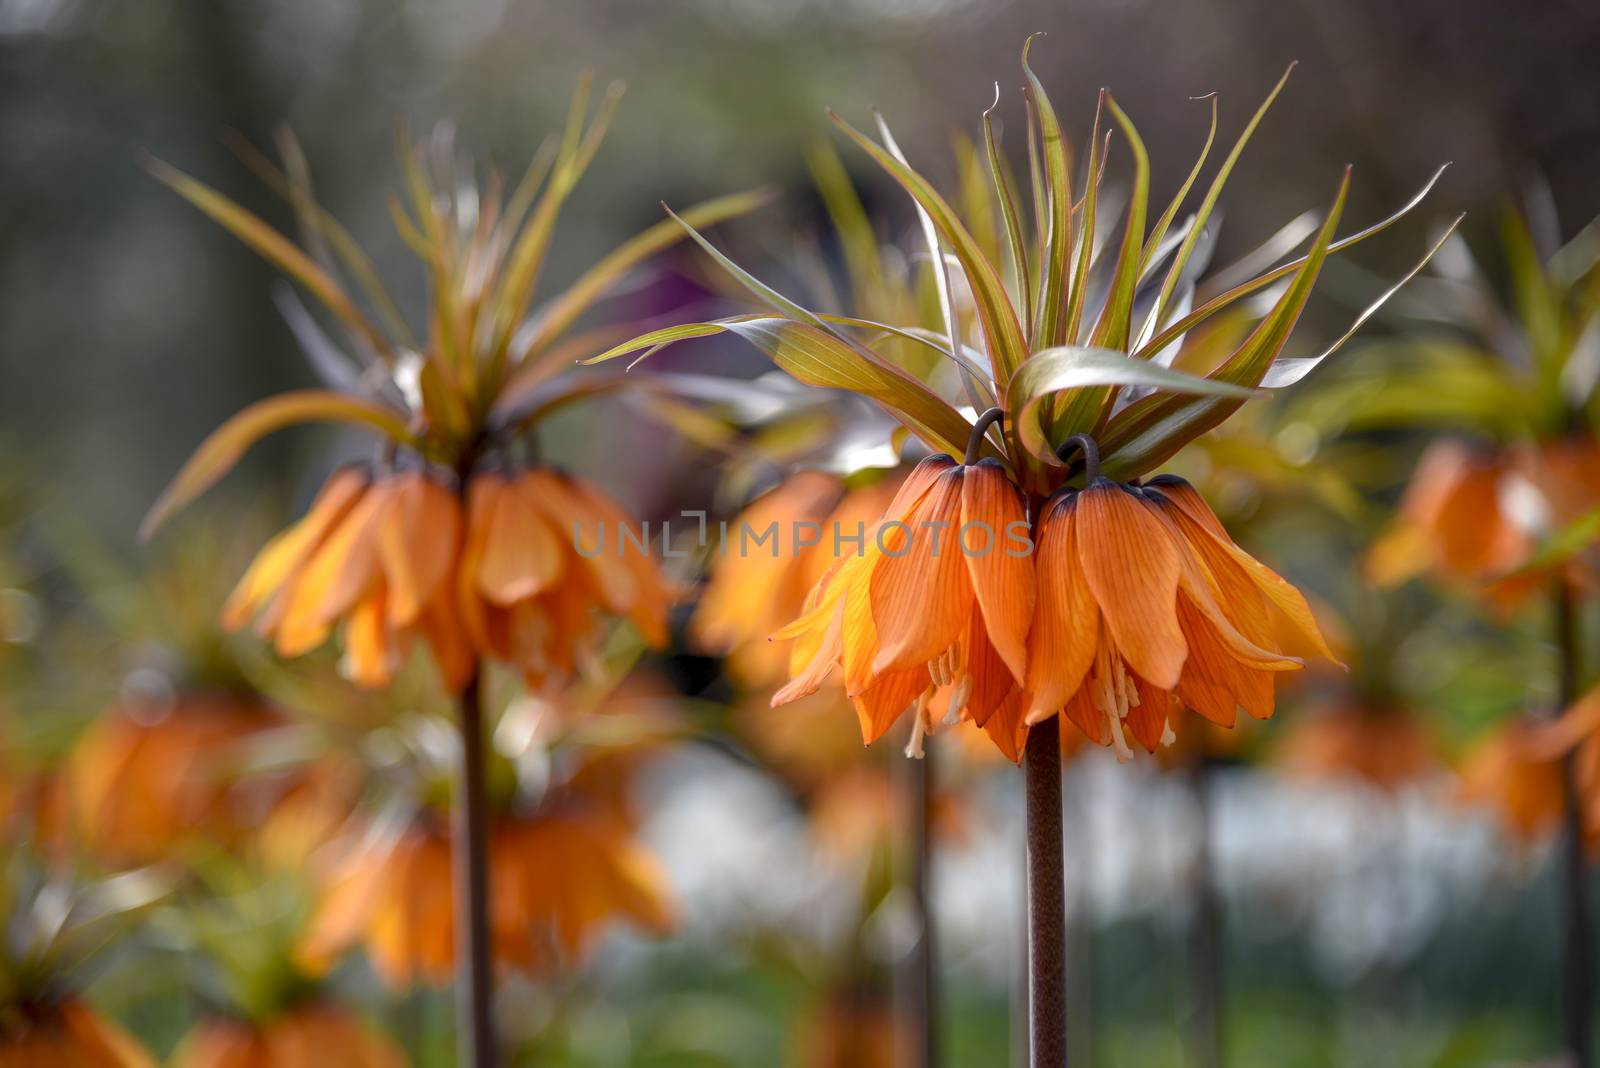 Orange Crown Imperial flowers against a blur flower background under a sunny day light by ankorlight